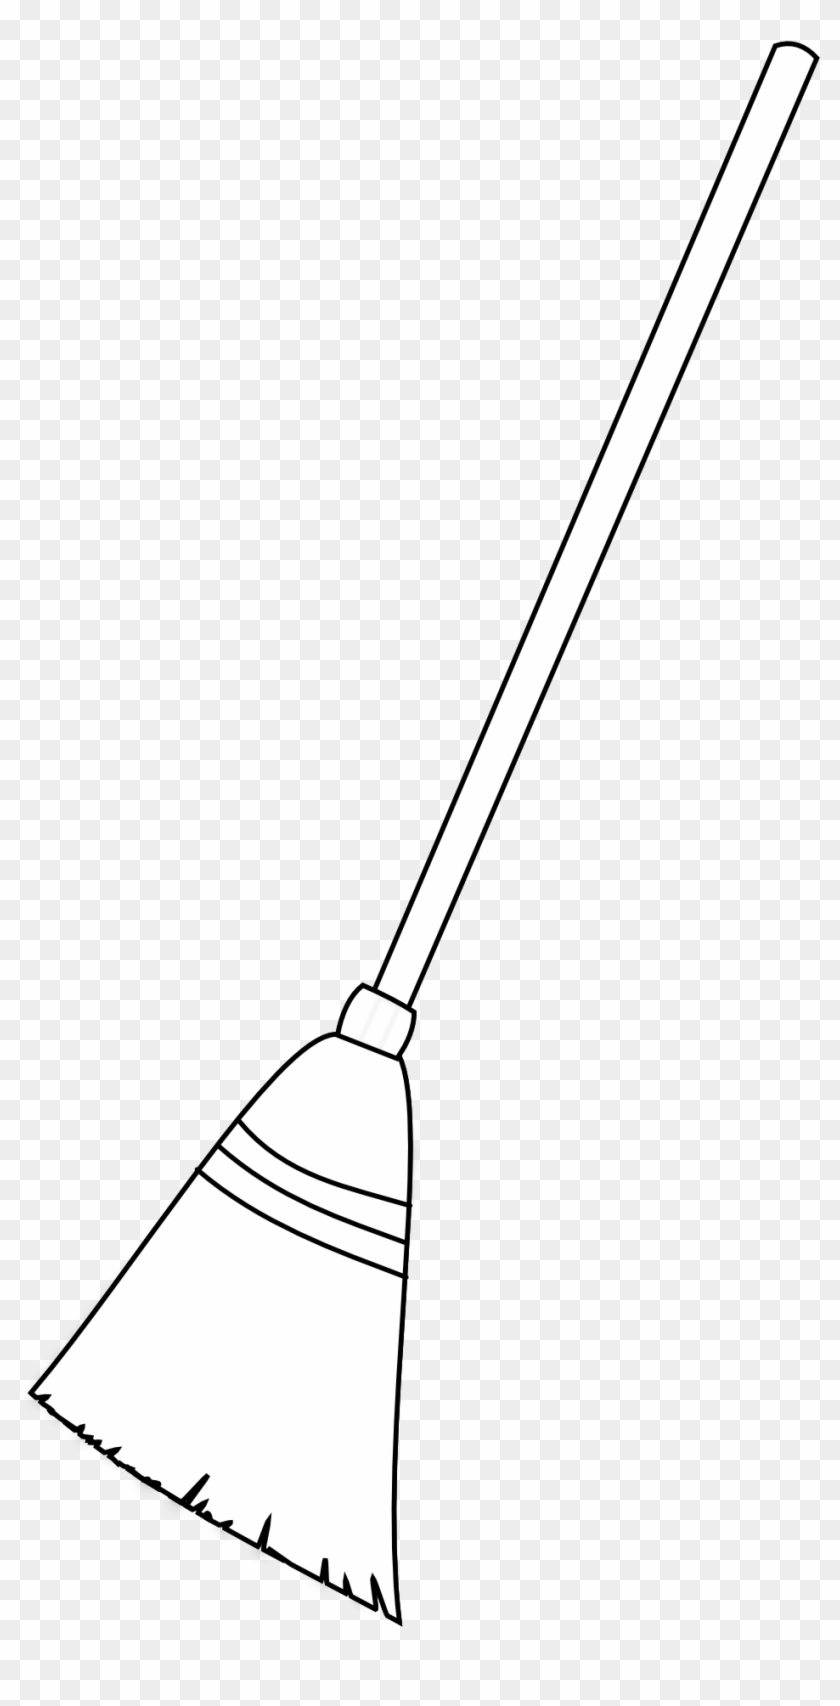 Clip Art Royalty Free Stock Broom Clipart Black And - Broom With Black Background - Png Download #286254